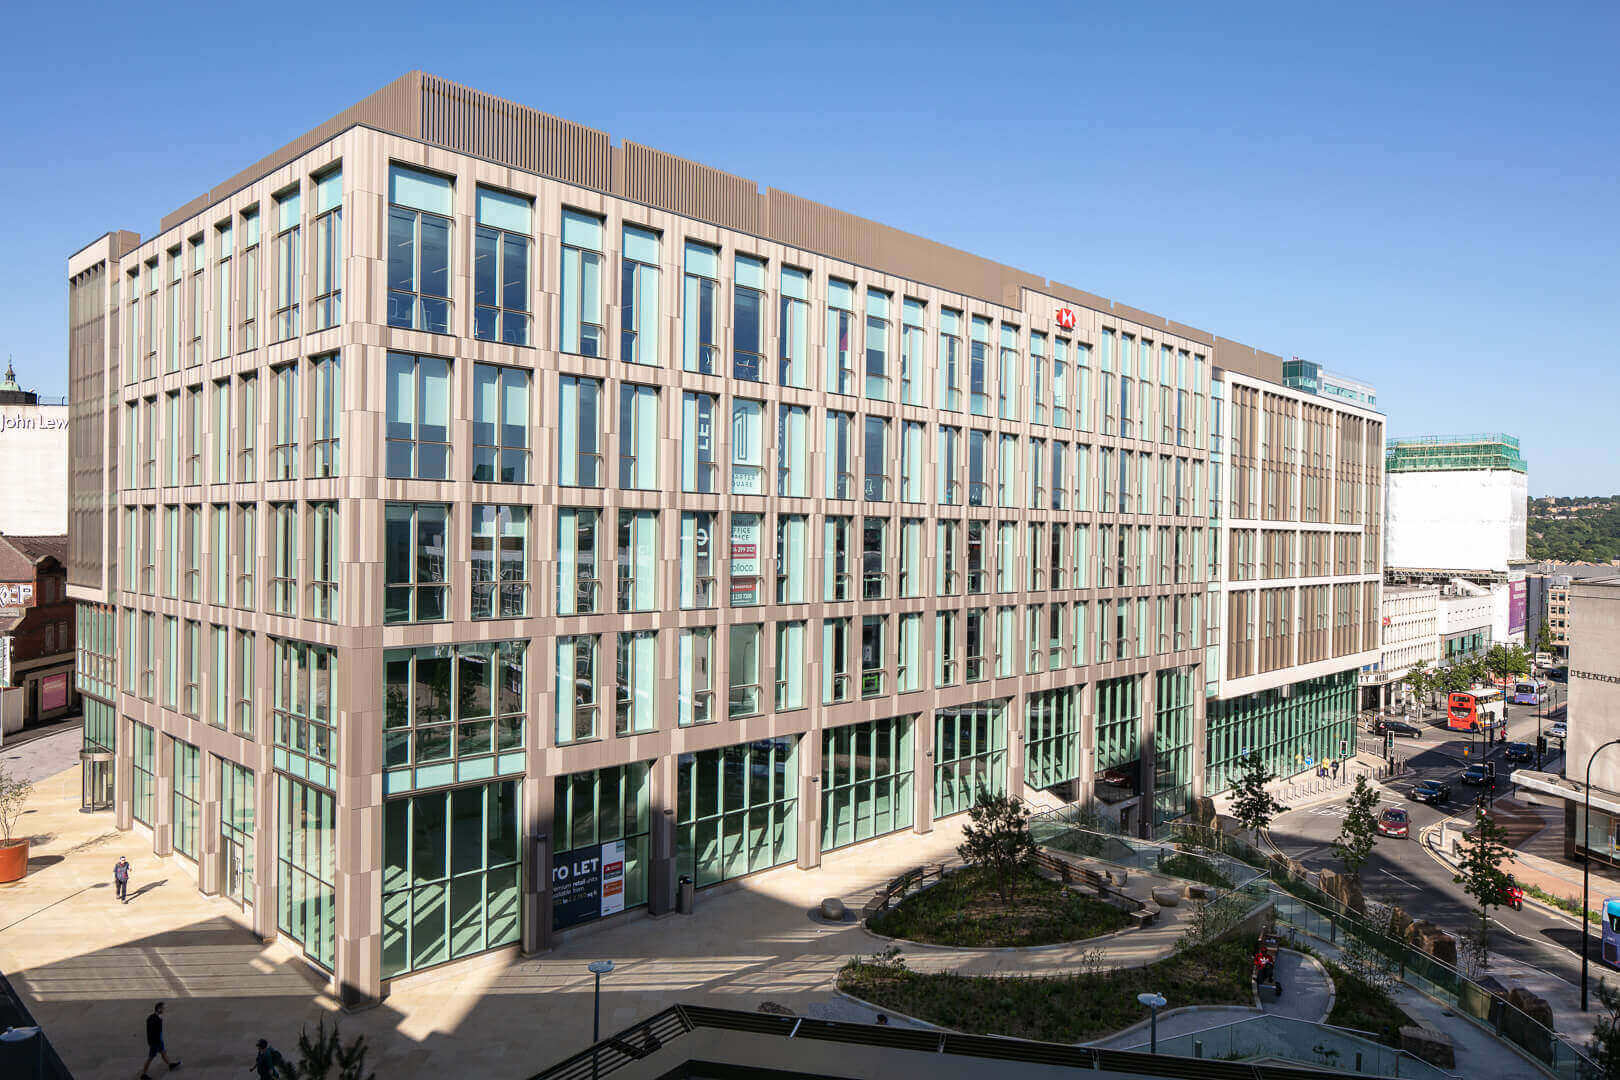 Commercial Architecture, Interiors & Aerial Photography - New construction and refurbishment at HSBC, Sheffield